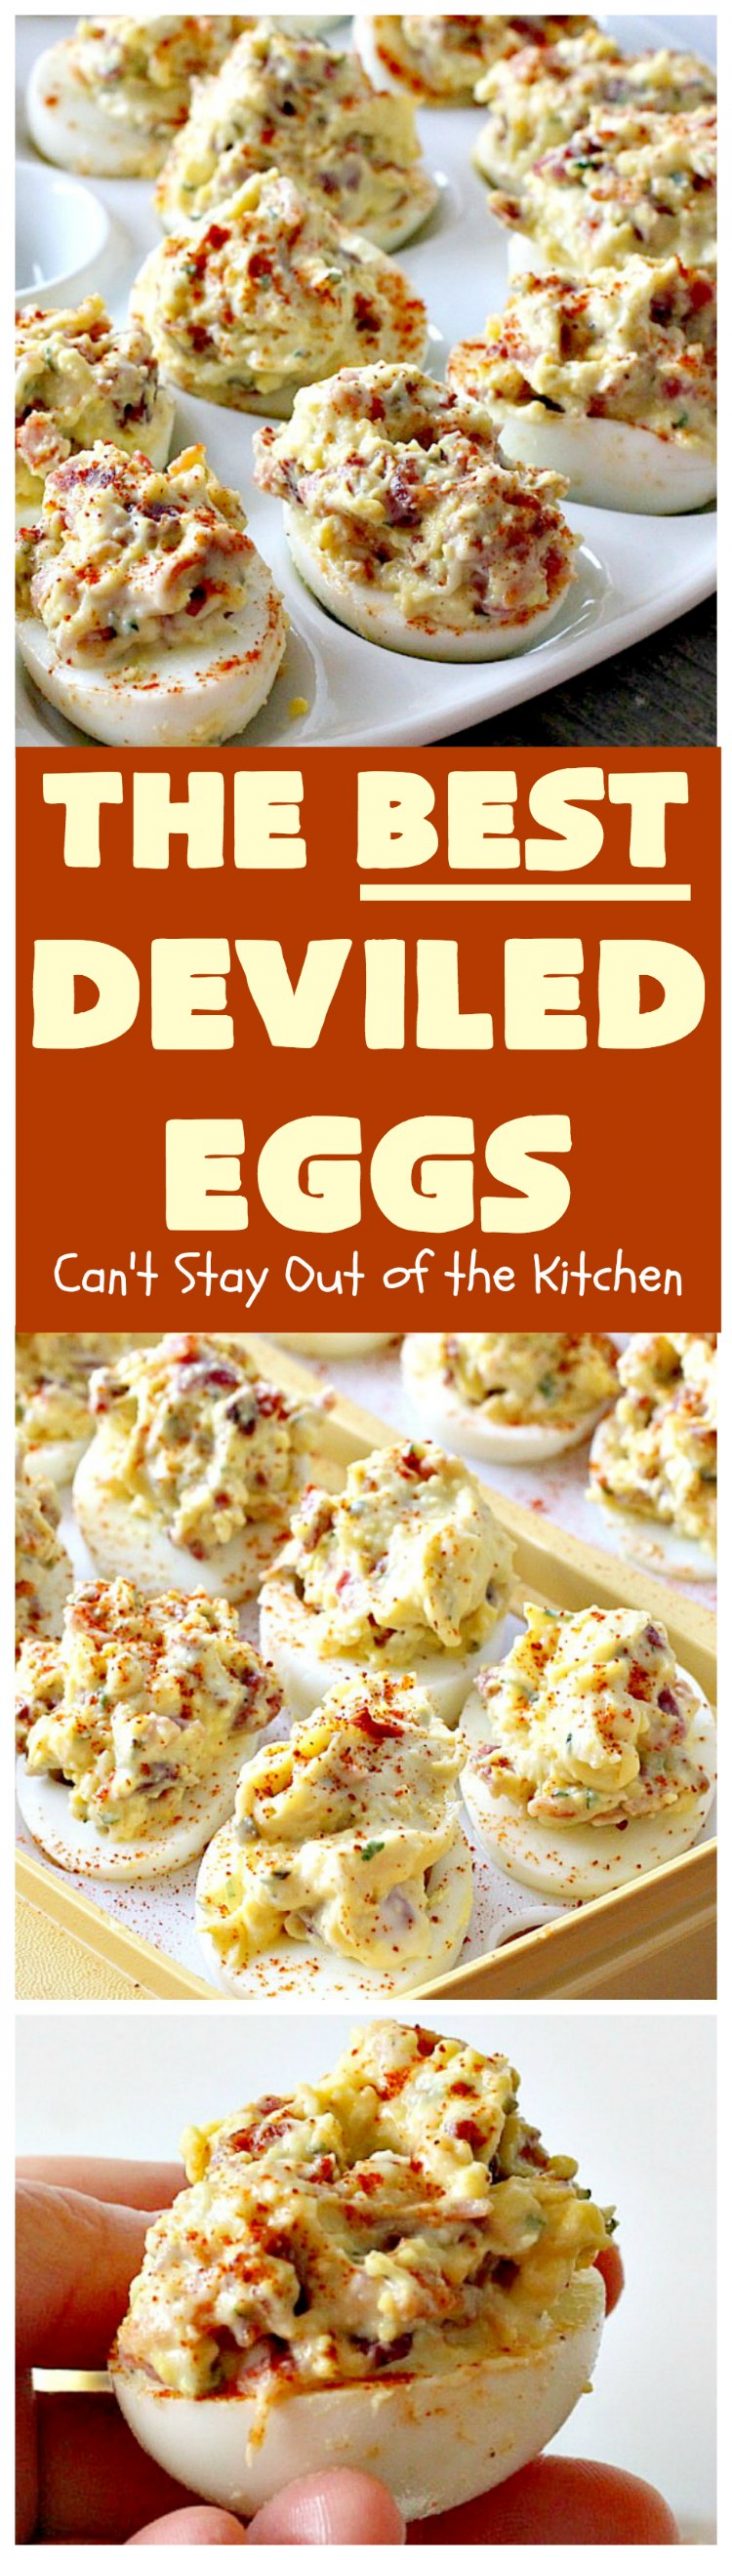 The BEST Deviled Eggs | Can't Stay Out of the Kitchen